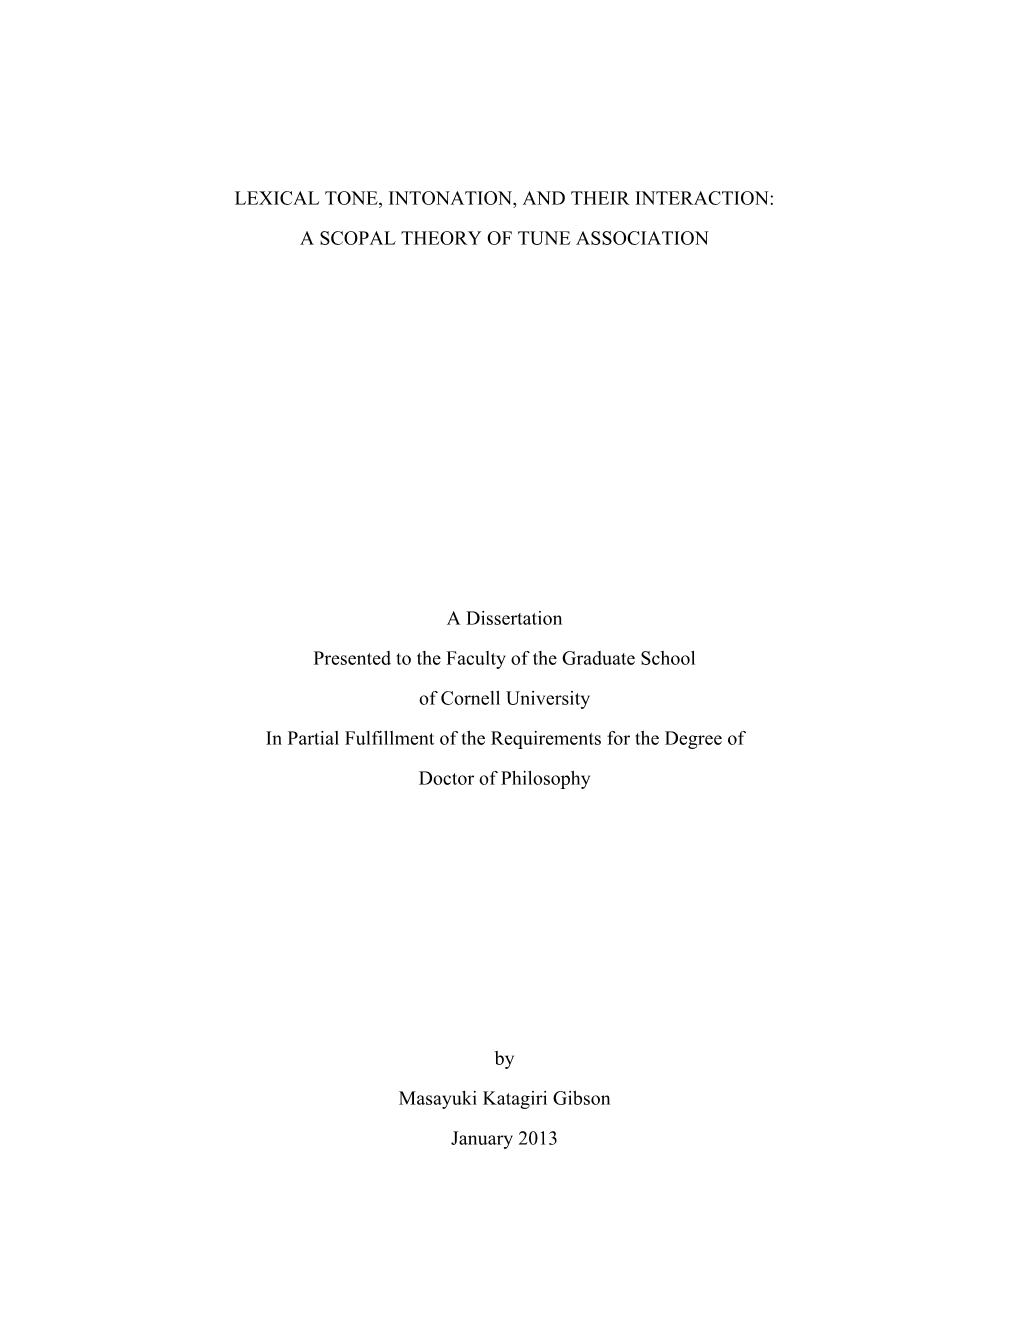 Lexical Tone, Intonation, and Their Interaction: a Scopal Theory of Tune Association